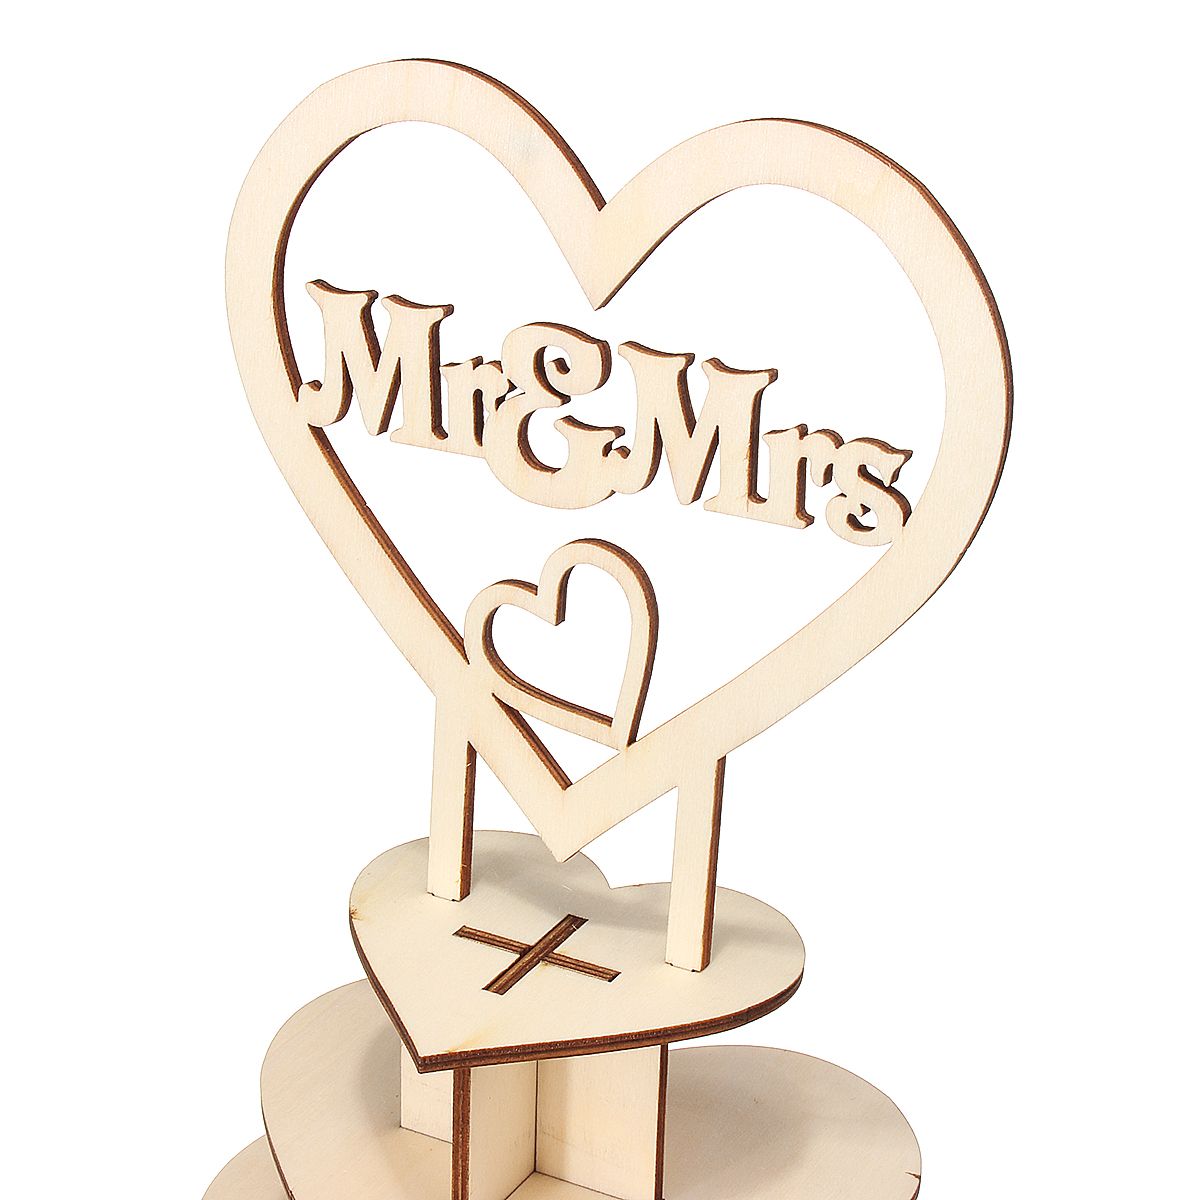 Personalised-Chocolate-Snack-Display-MrMrs-Heart-Wedding-Dessert-Stand-Shelf-Rack-Party-Centrepiece-1635506